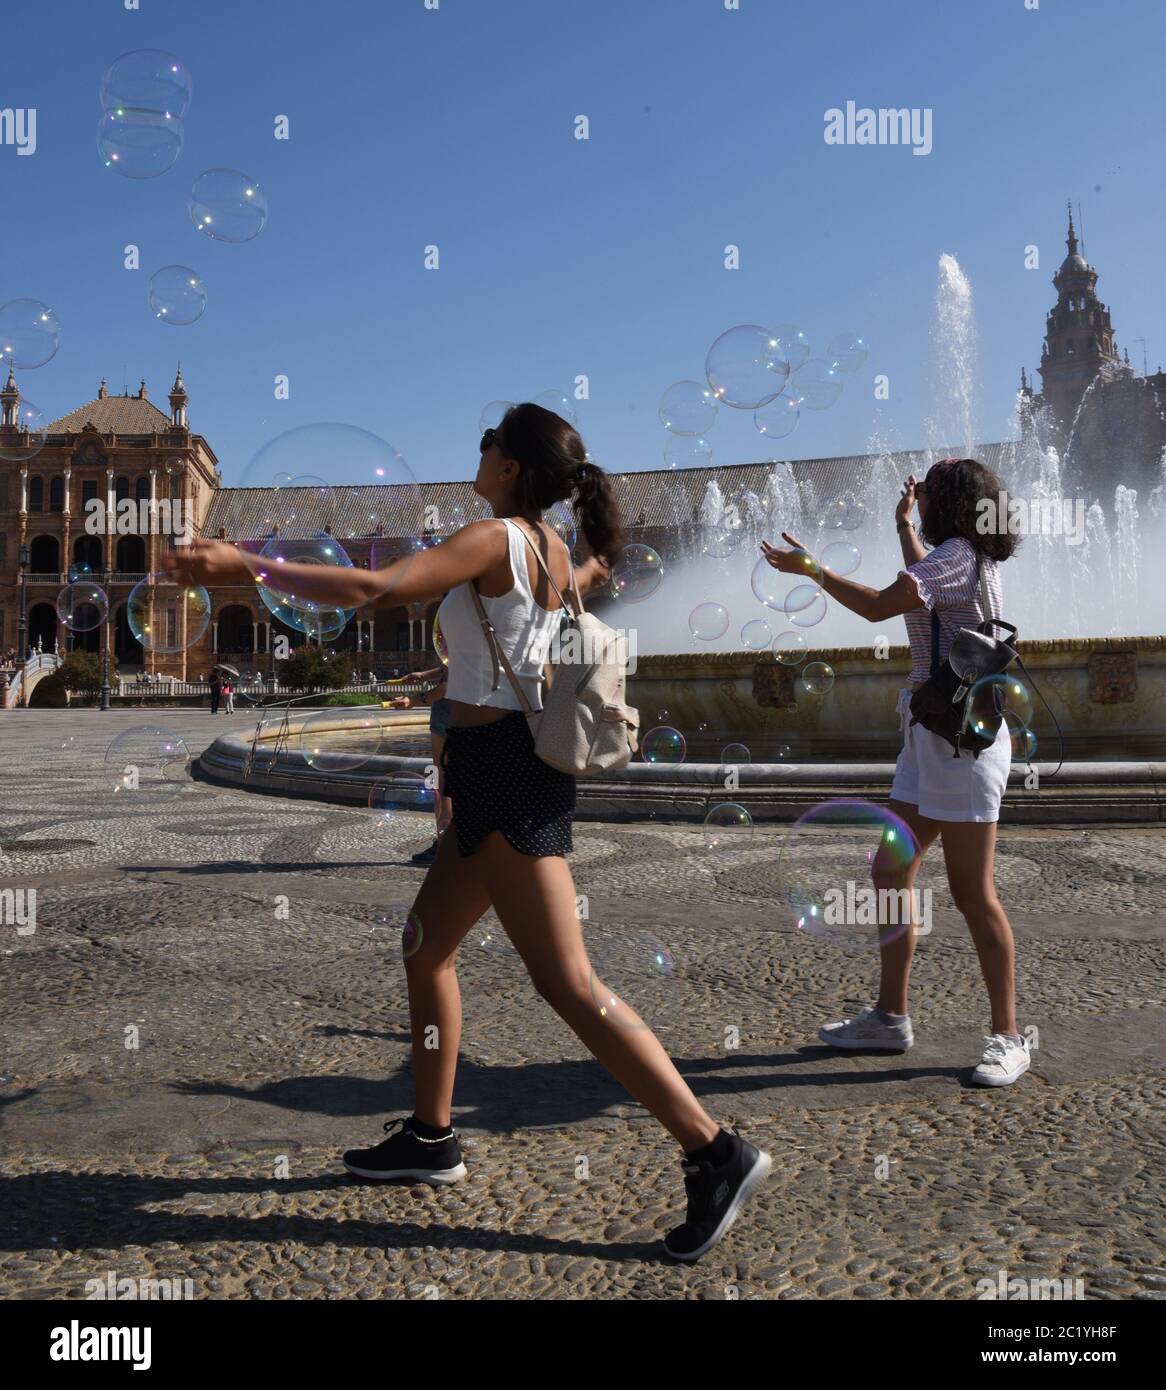 Catching Bubbles in Plaza España, Seville Stock Photo